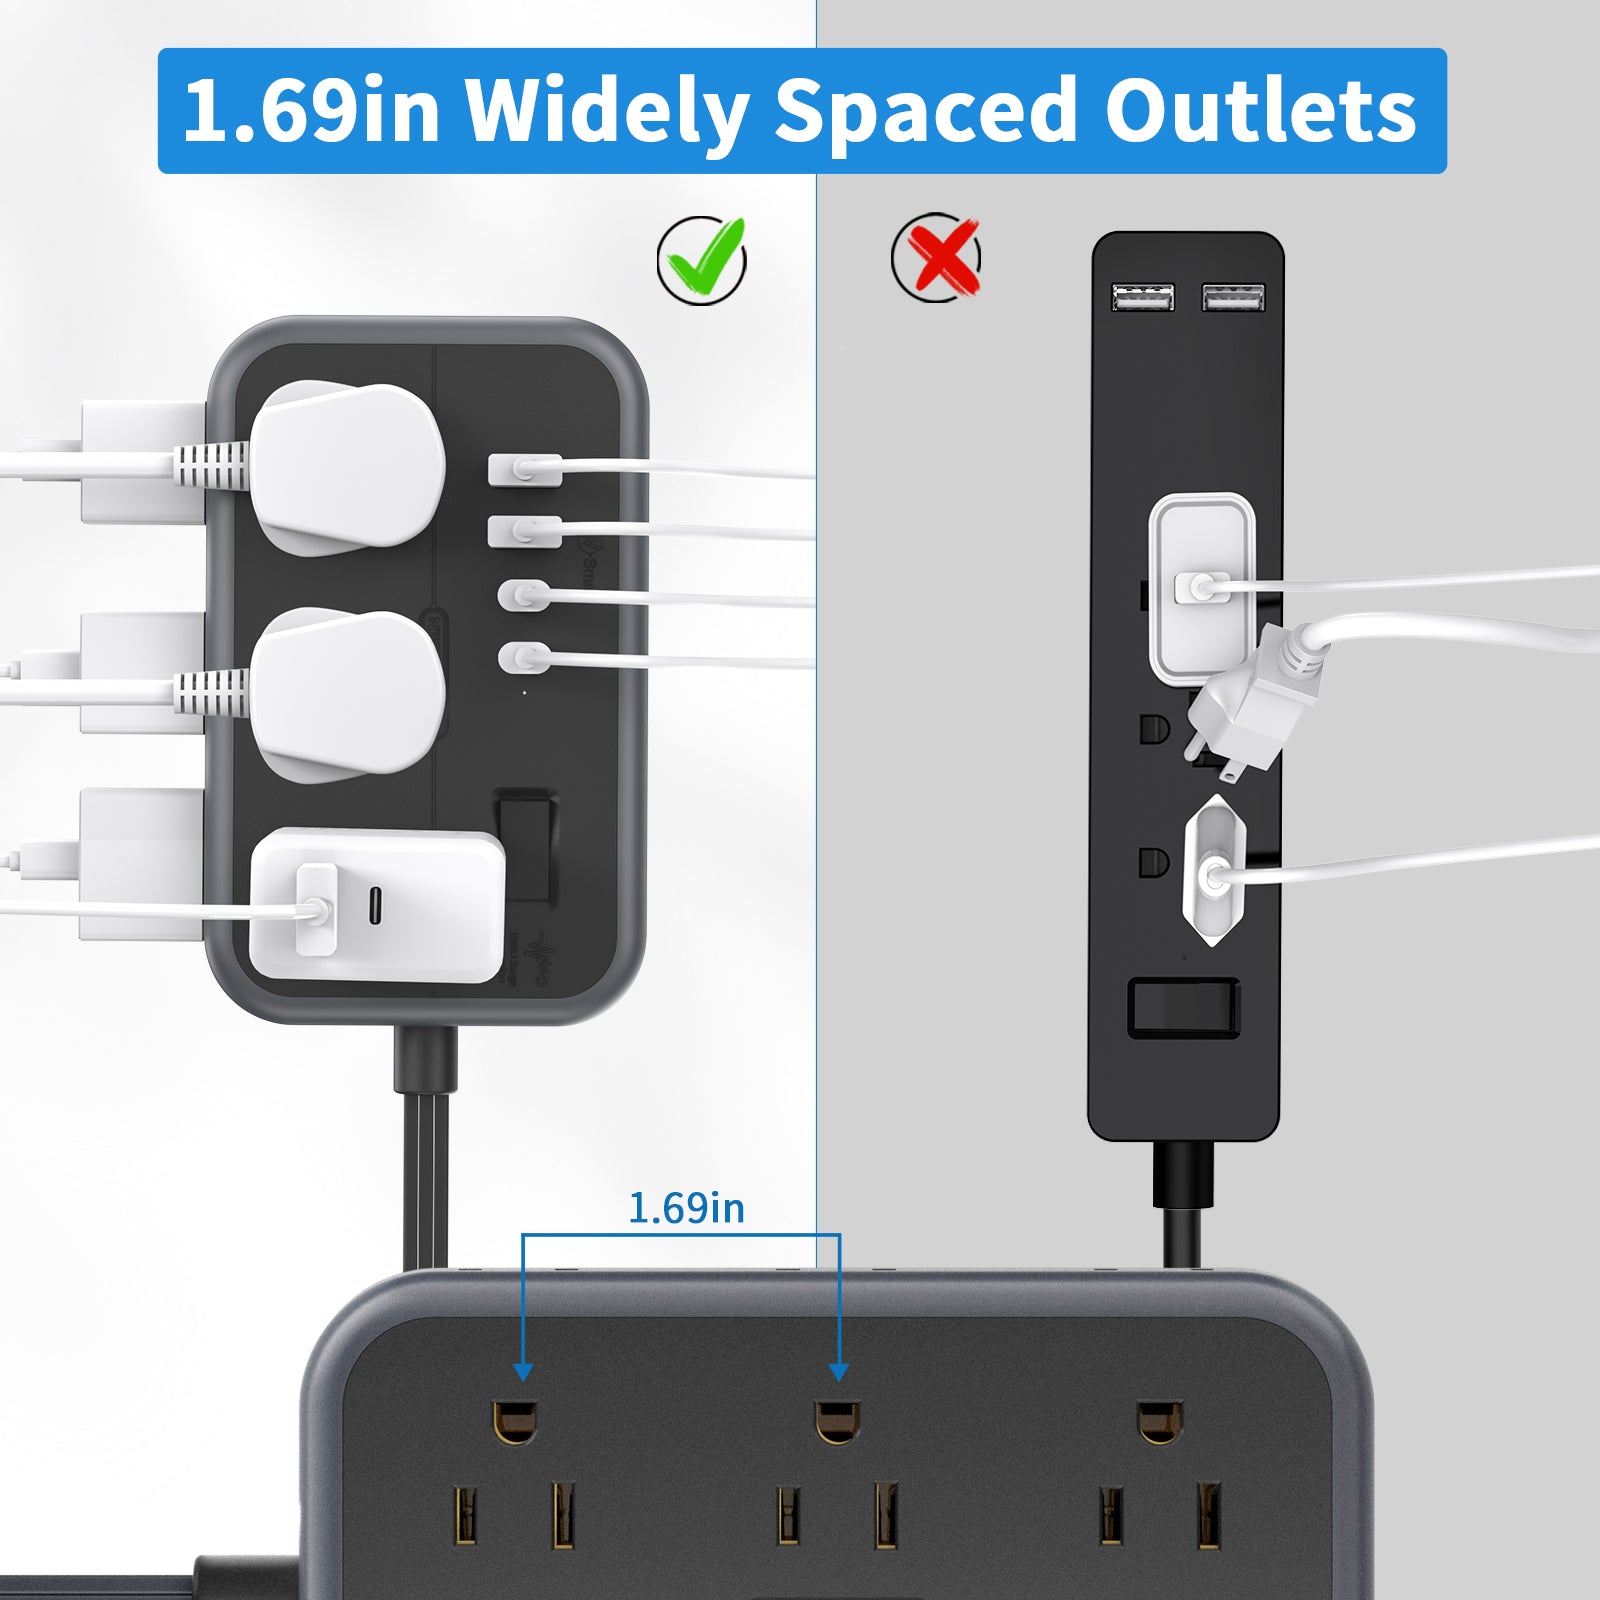 Ntonpower New Surge Basic Power Strip 6 Outlets 2 USB 2 TYPE-C Flat Cord